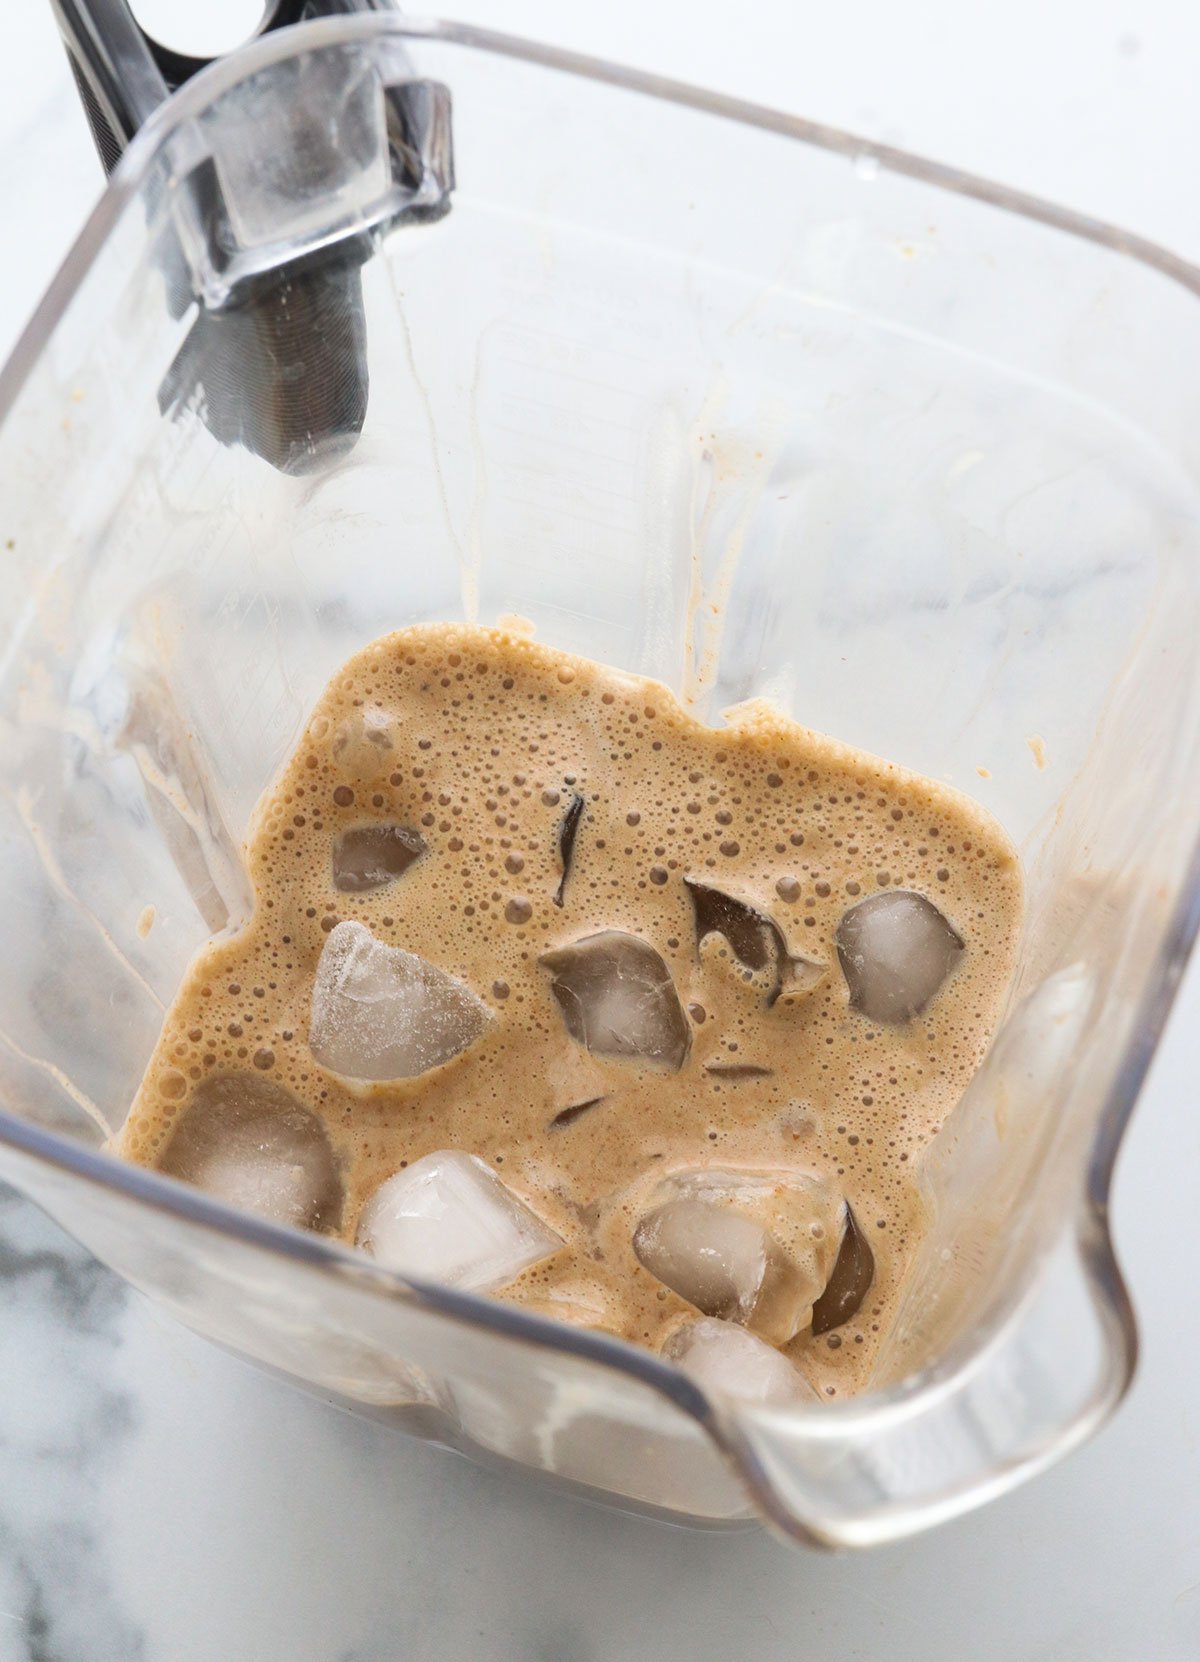 Ice added to coffee smoothie mixture.